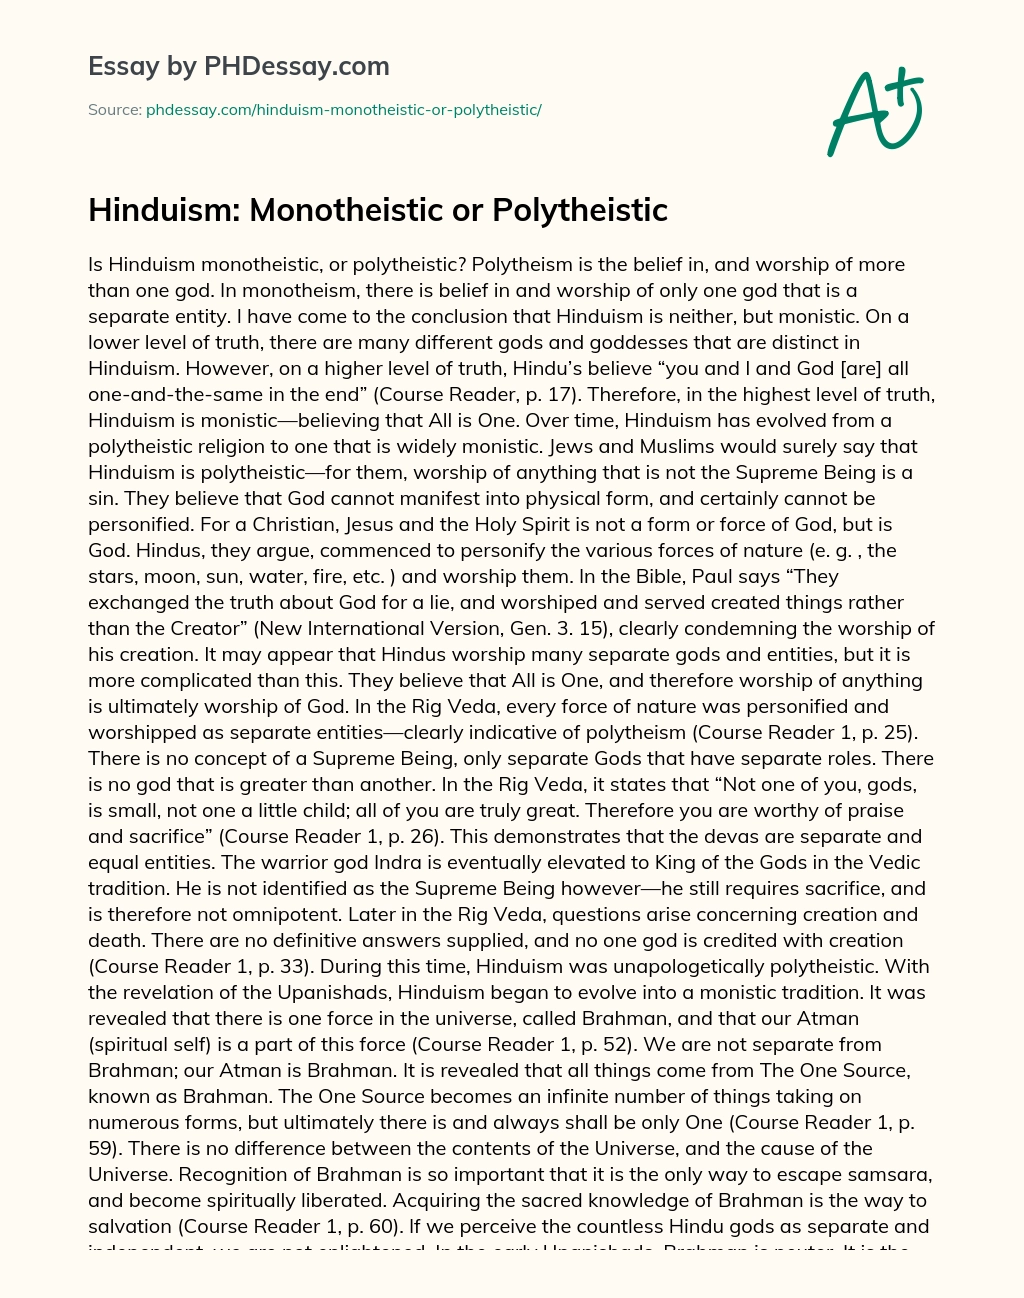 Hinduism: Monotheistic or Polytheistic essay